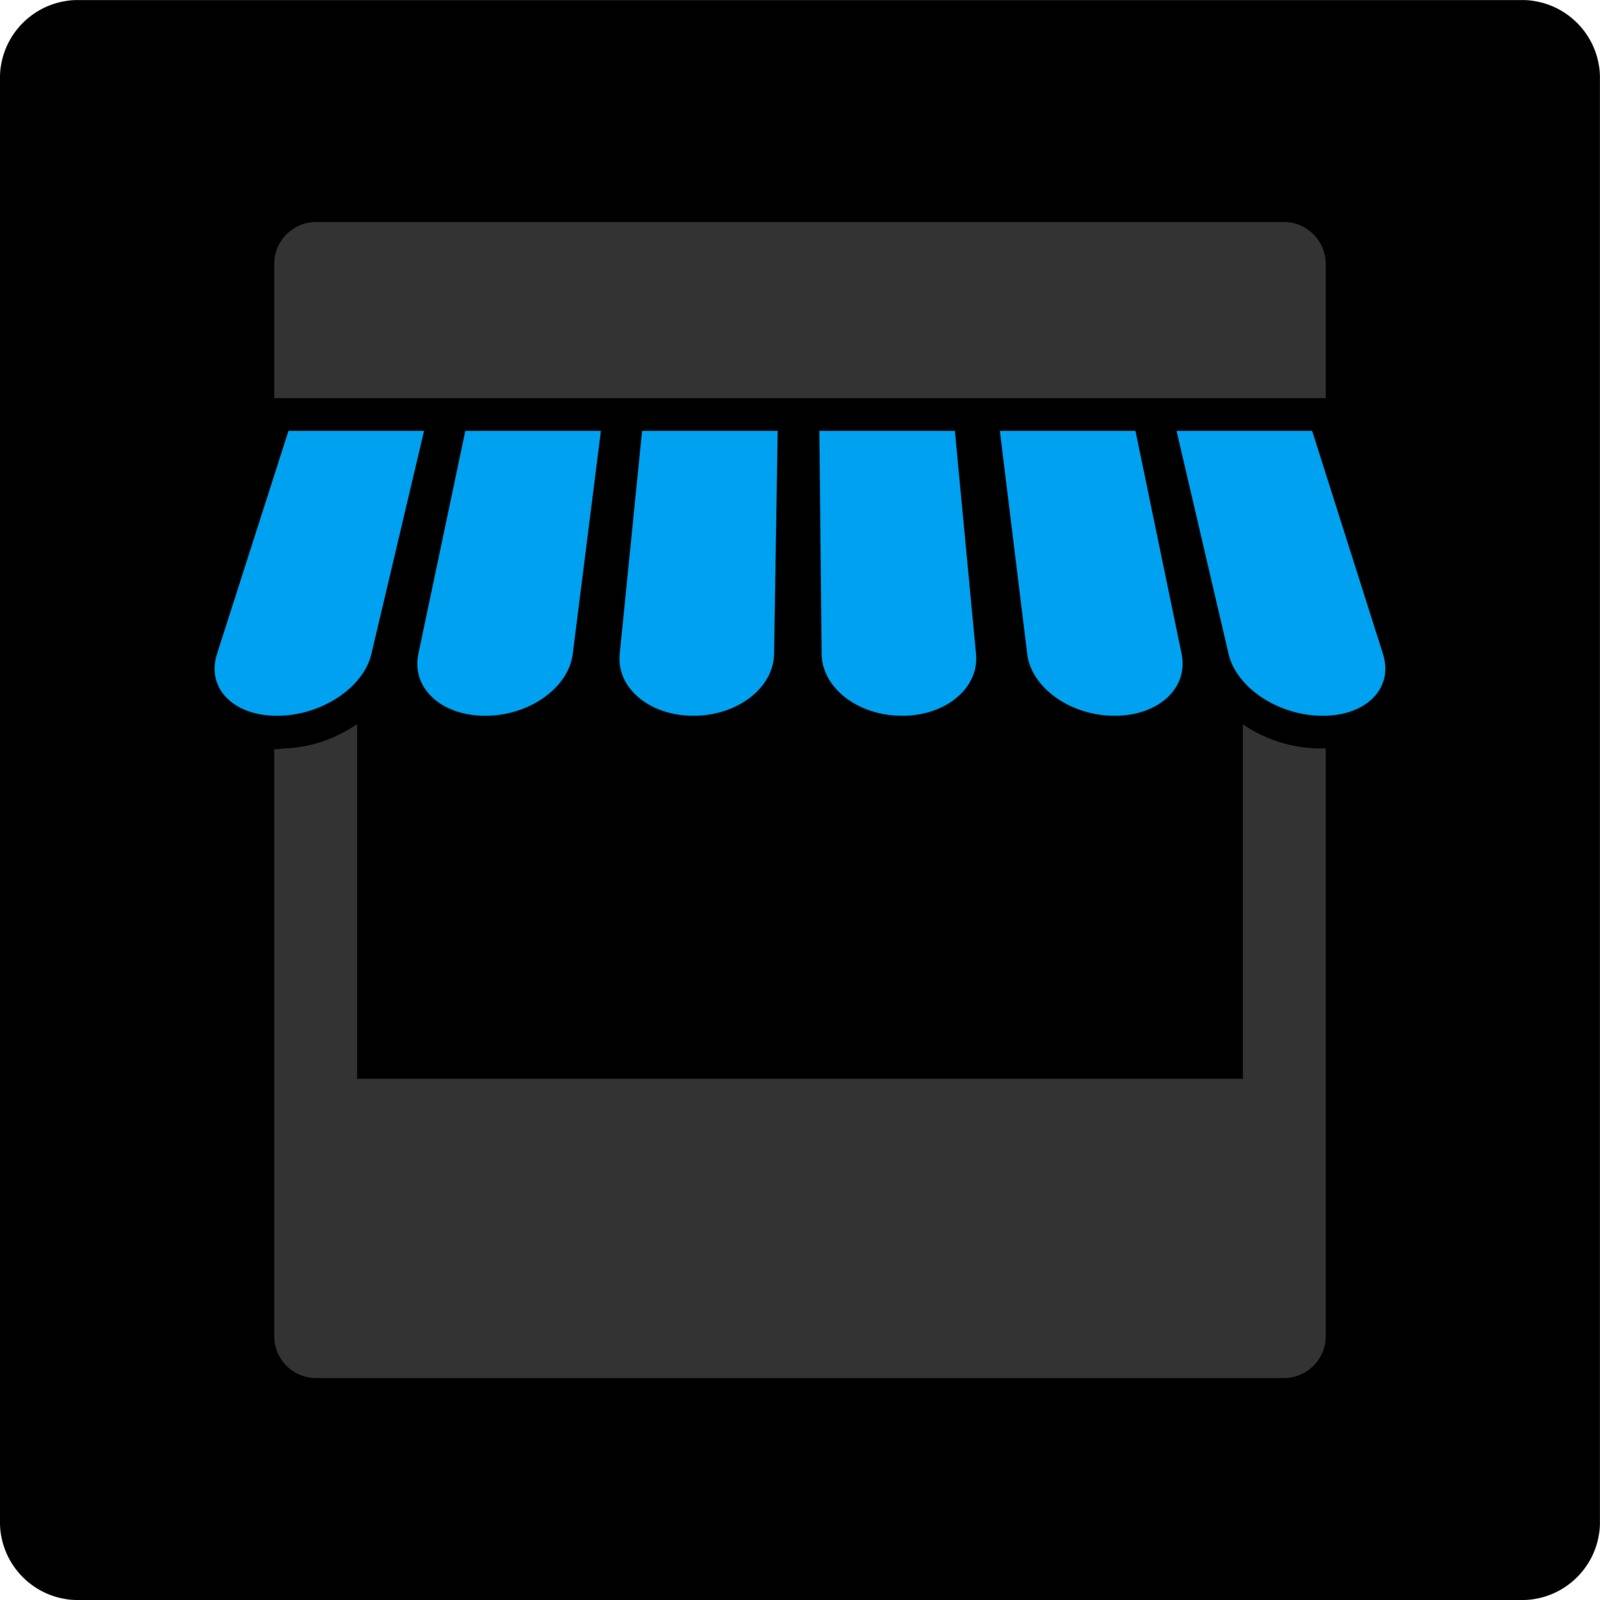 Store icon. Vector style is bicolor flat symbol, gray and light blue colors, black rounded square button, white background.